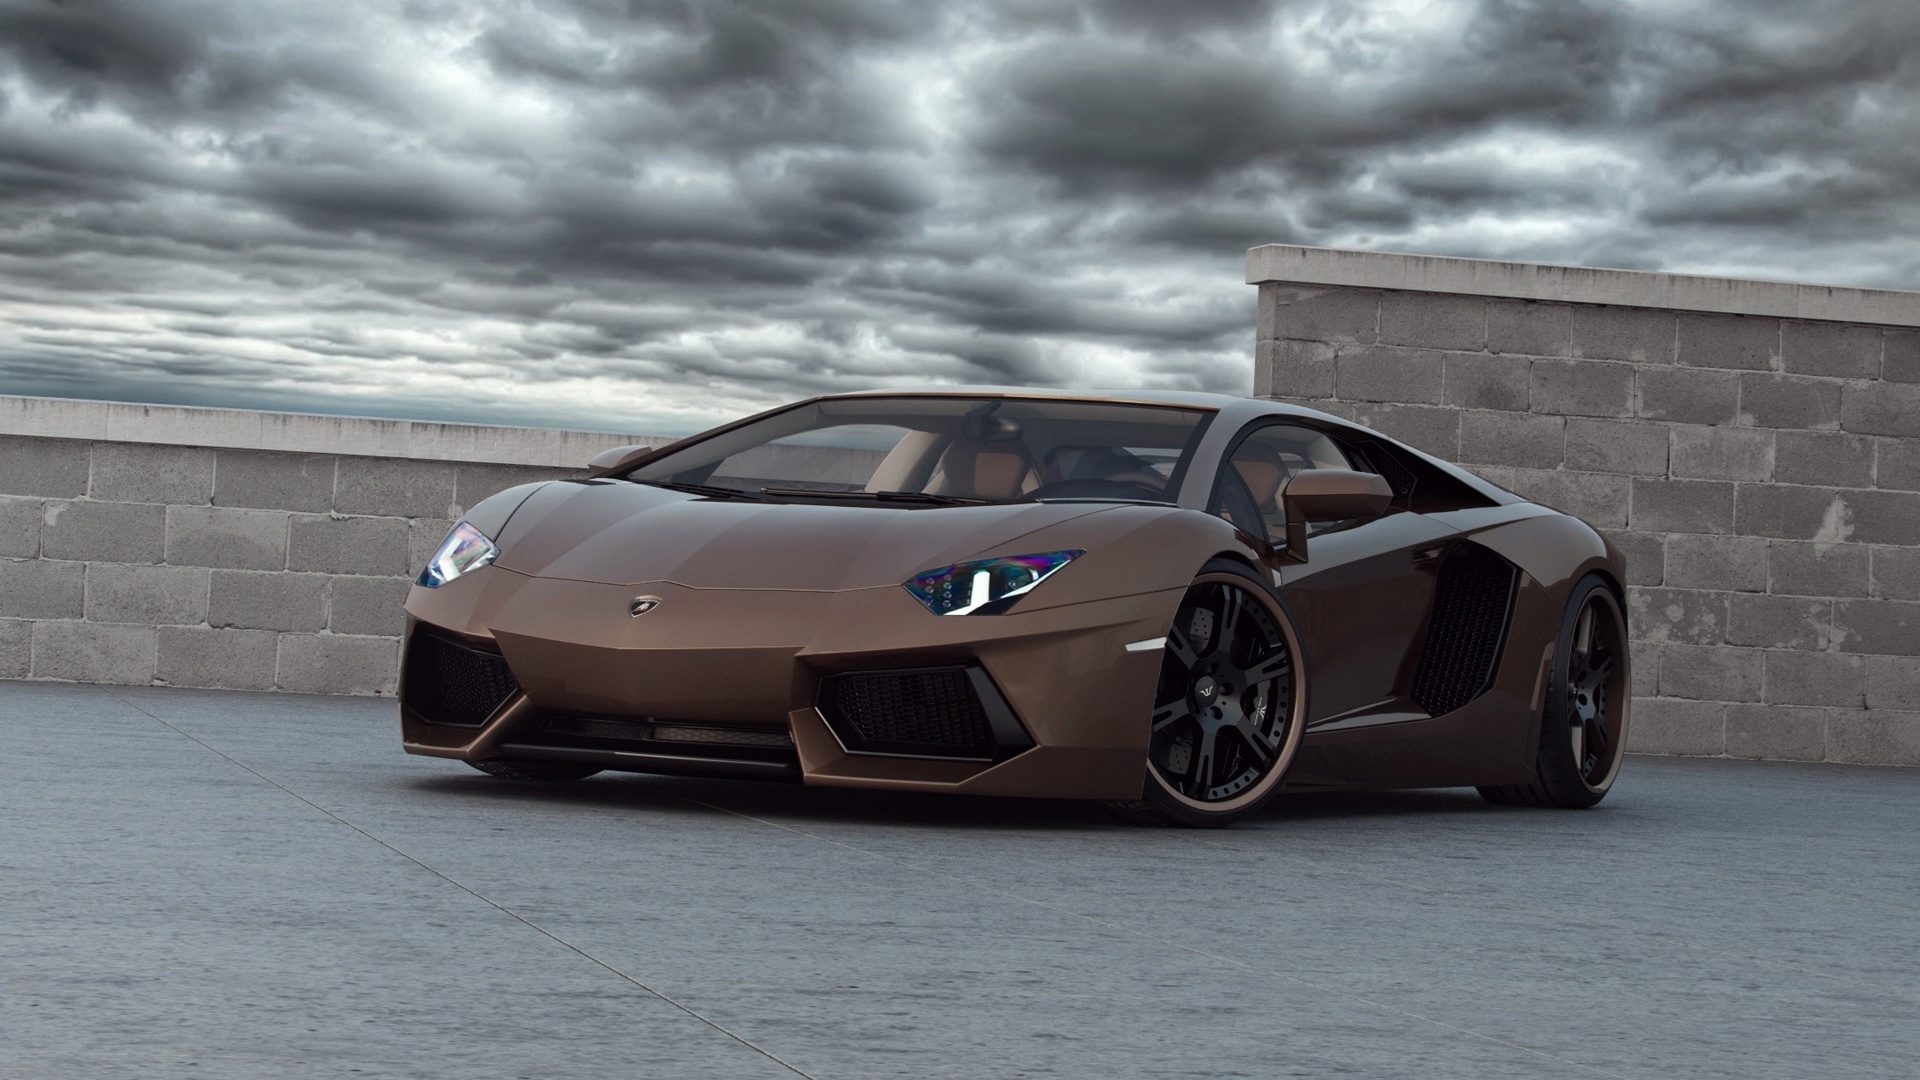 Lamborghini Aventador Wallpapers HD A41 Brown - lamborghini aventador desktop sports cars, race cars, luxury cars, expensive cars, wallpapers pictures images free download